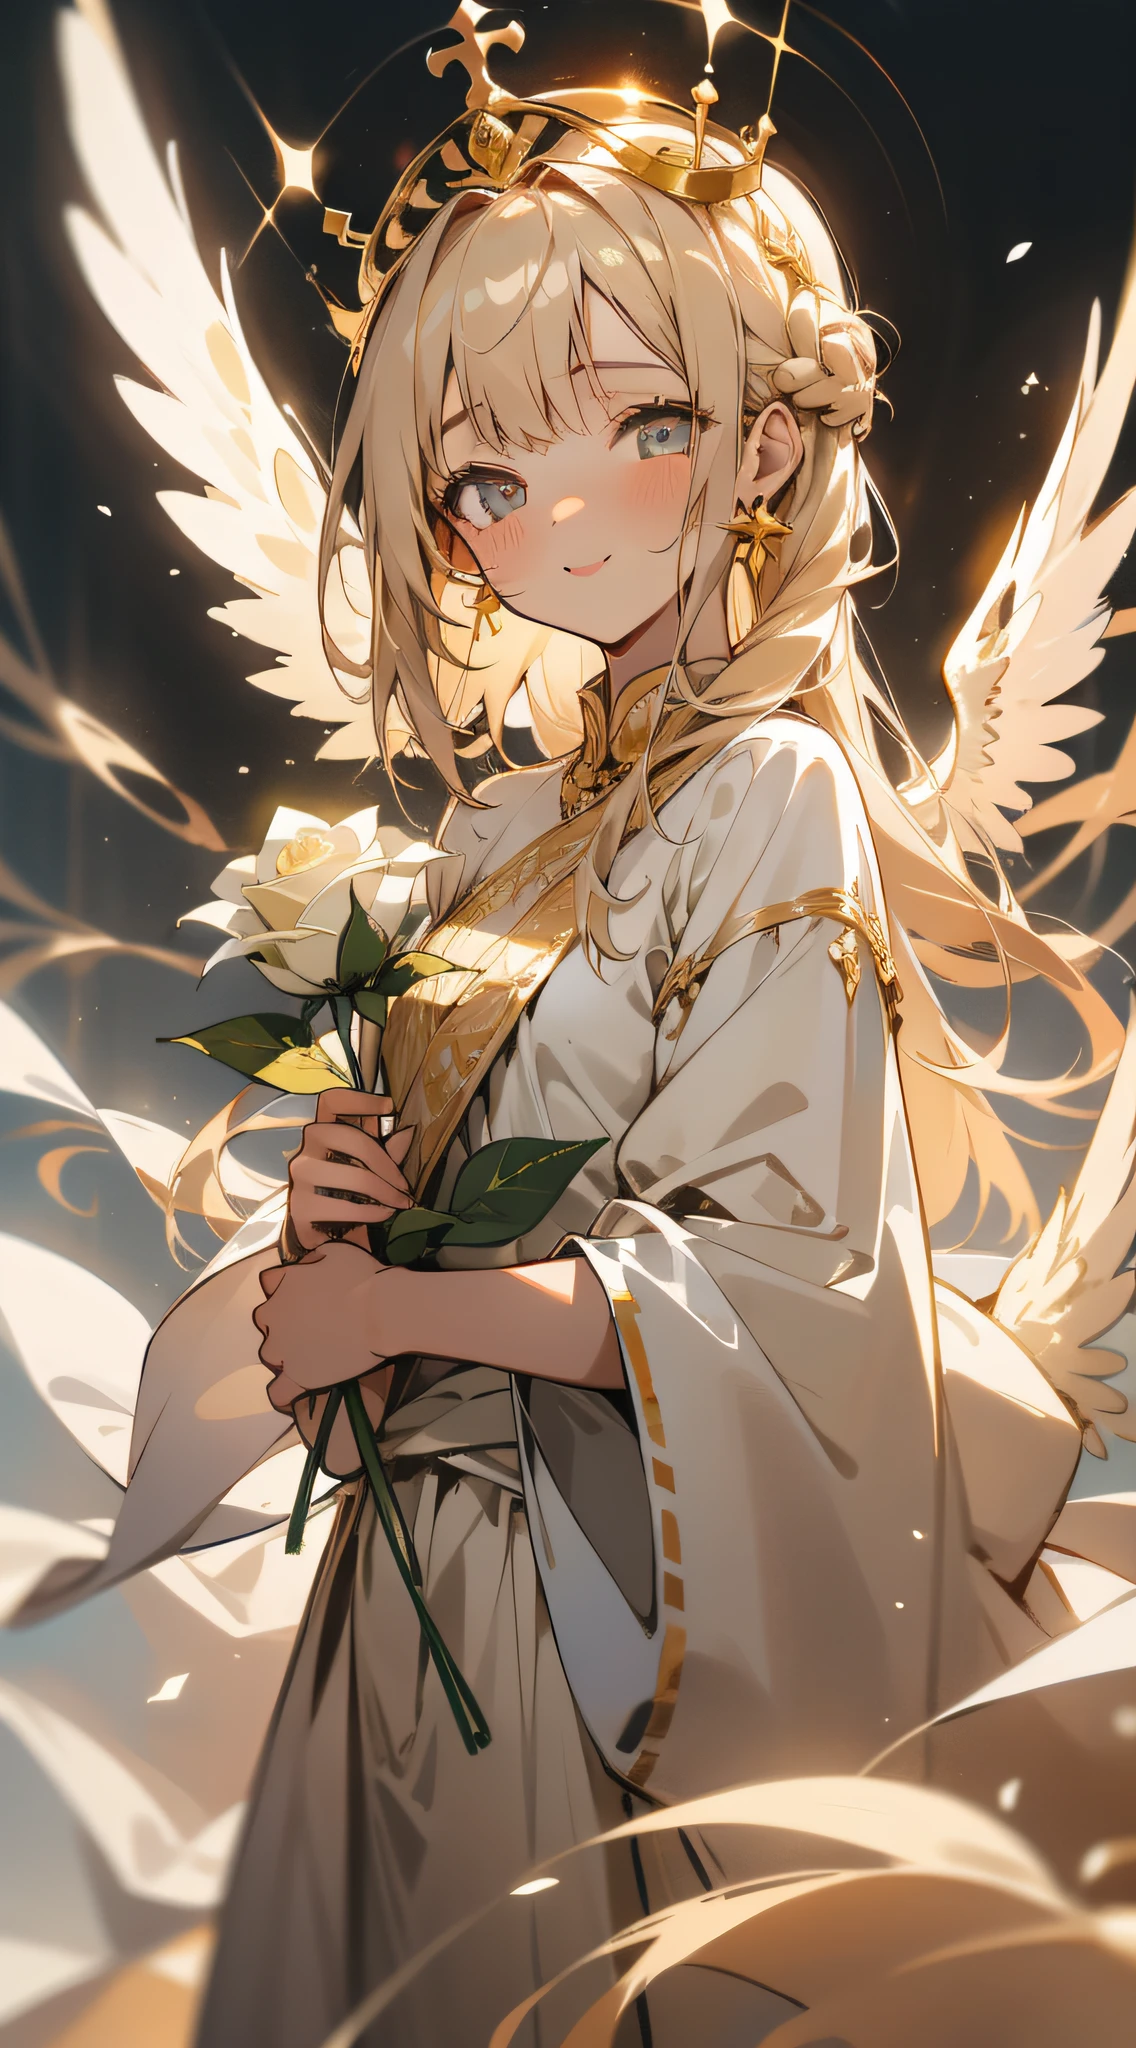 1girl, masterpiece, best quality,angel, holding rose, perfect face, cute, expressive eyes, pure, divine, inocent, saint, holy, golden, white dress, morning, soft colors,calm,tranquil, peace, smile, aromatic, gentil, femine, delicate, intricate, 4k, traced lights, nostalgic, flowers crown, wings,